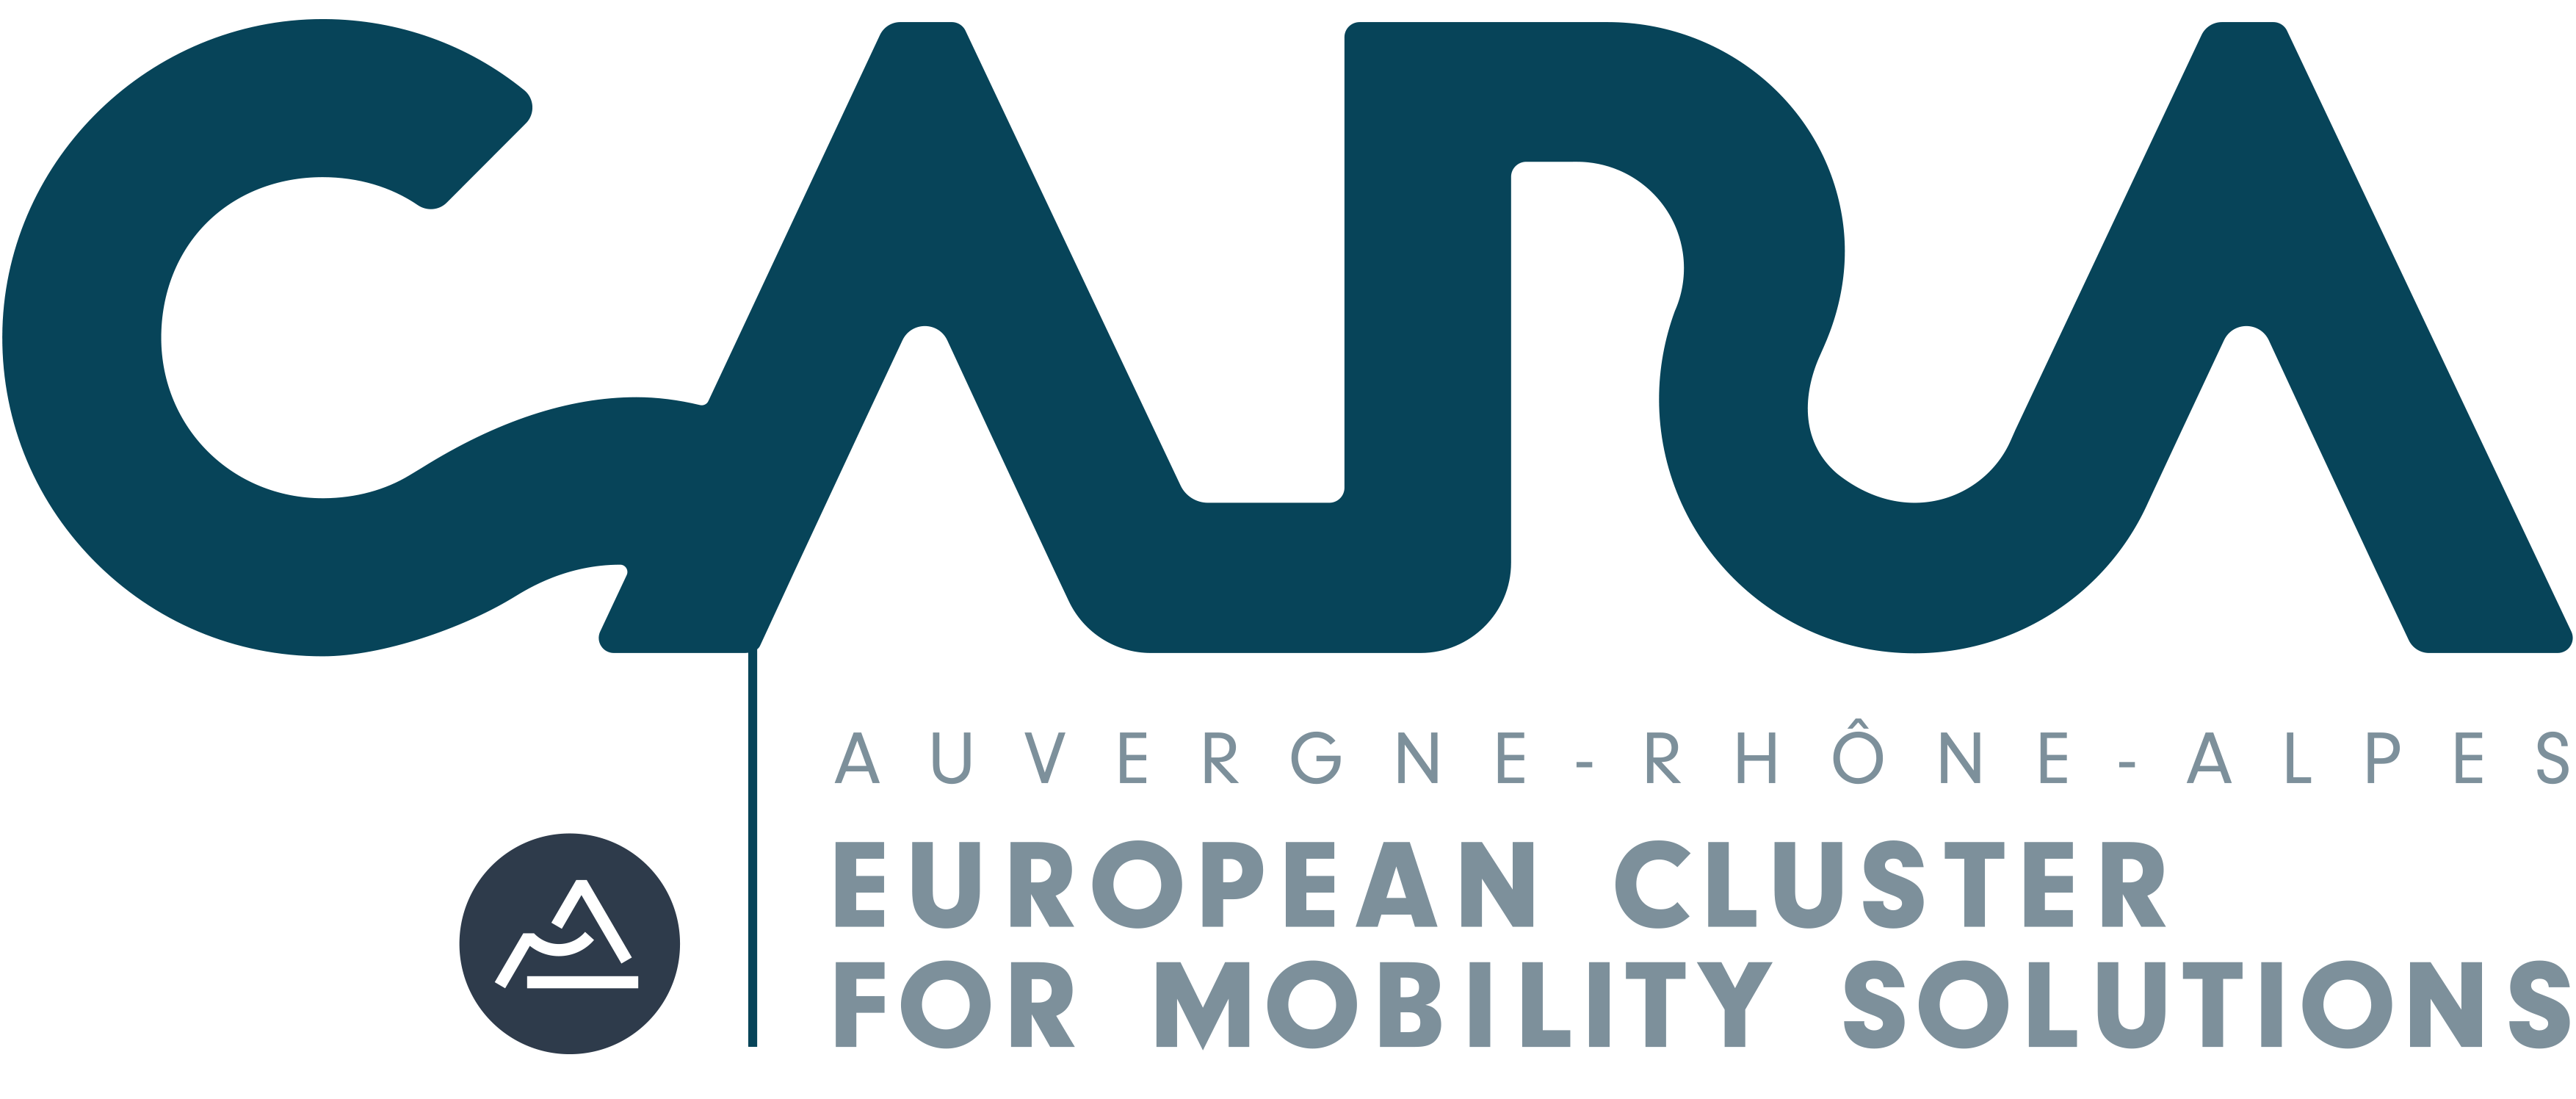 CARA - European cluster for mobility solutions